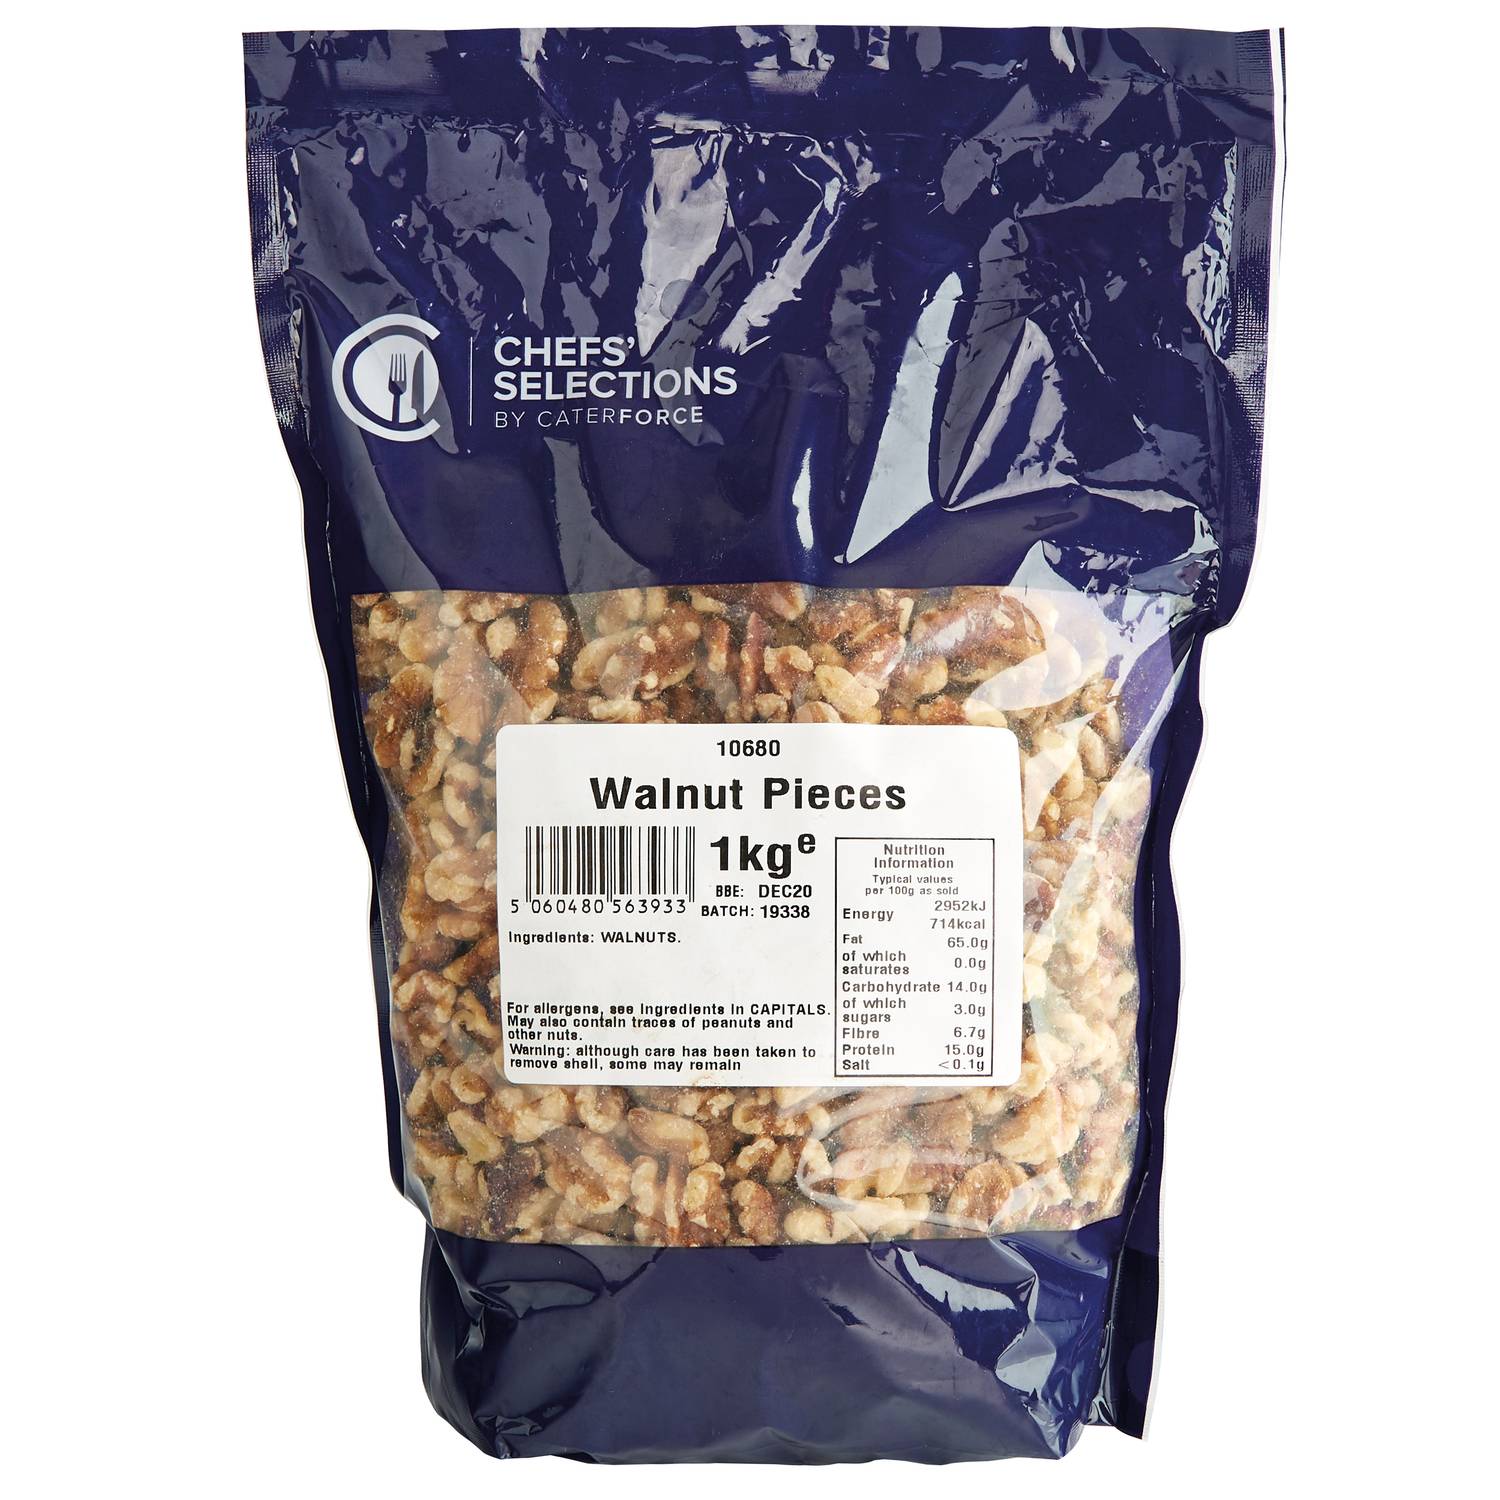 Chefs’ Selections Walnut Pieces (6 x 1kg)